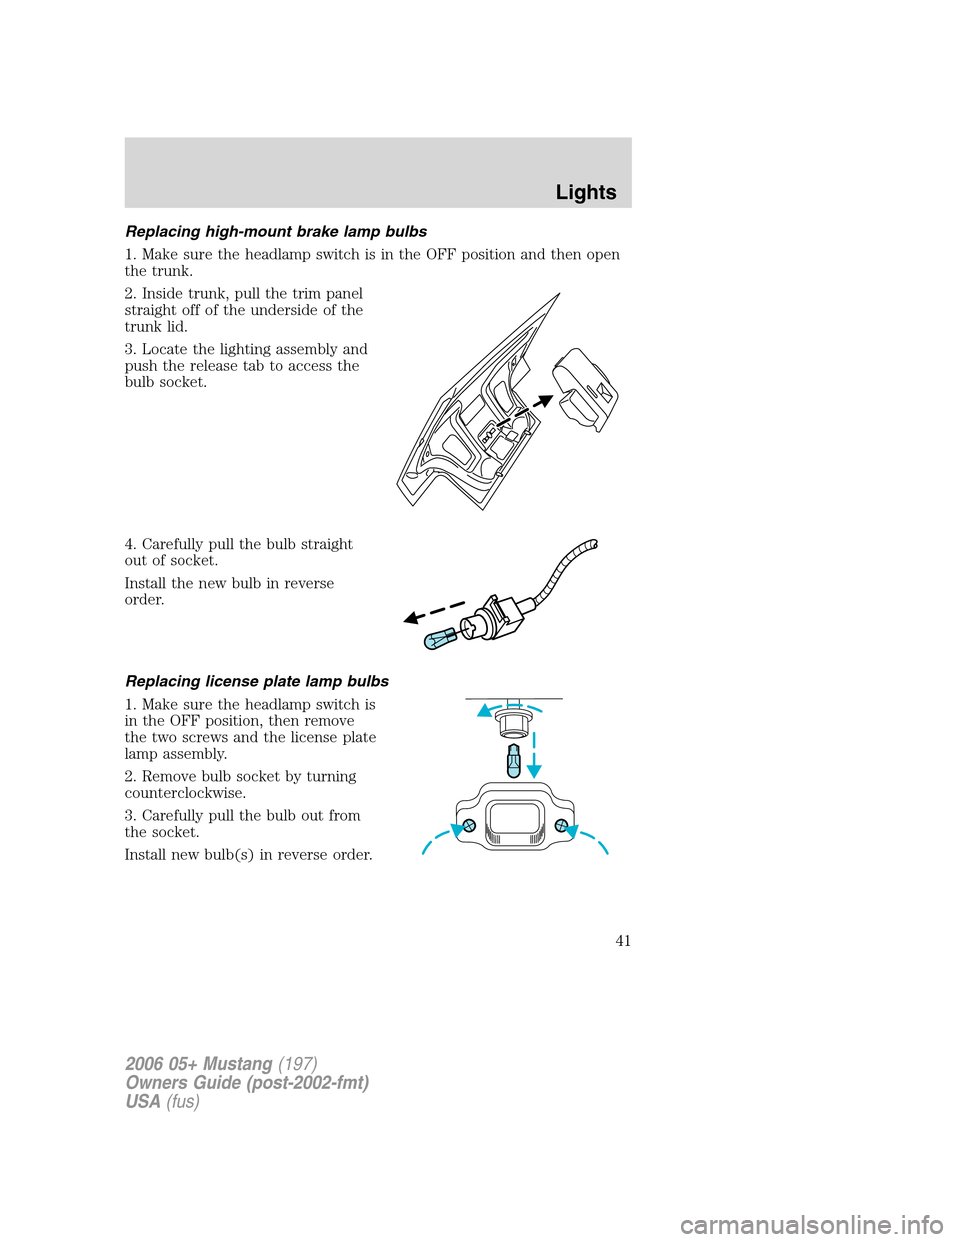 FORD MUSTANG 2006 5.G Service Manual Replacing high-mount brake lamp bulbs
1. Make sure the headlamp switch is in the OFF position and then open
the trunk.
2. Inside trunk, pull the trim panel
straight off of the underside of the
trunk l